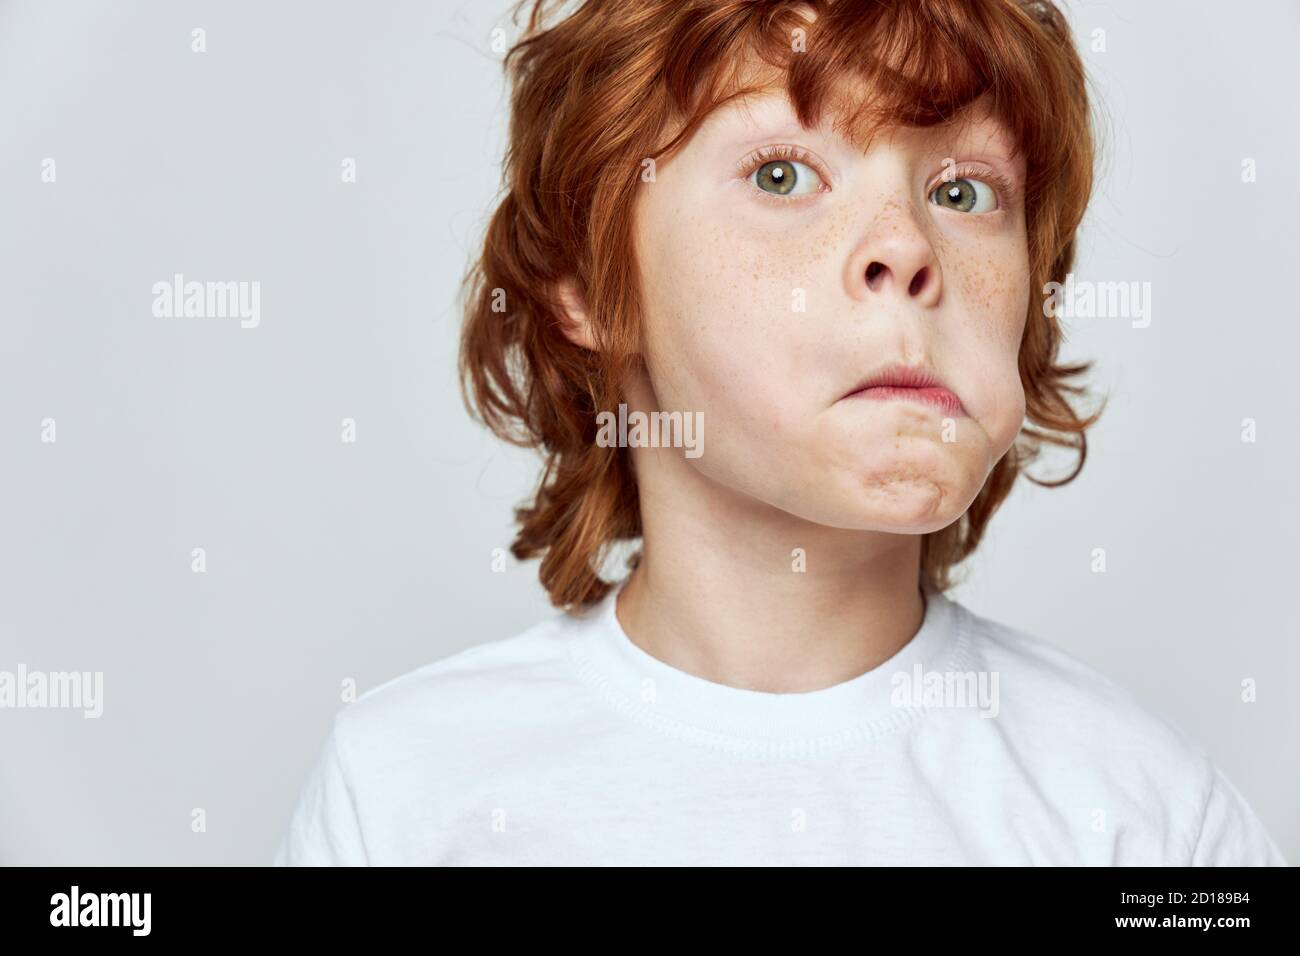 Grimacing red-haired child with puffed out cheek white t-shirt cropped  Stock Photo